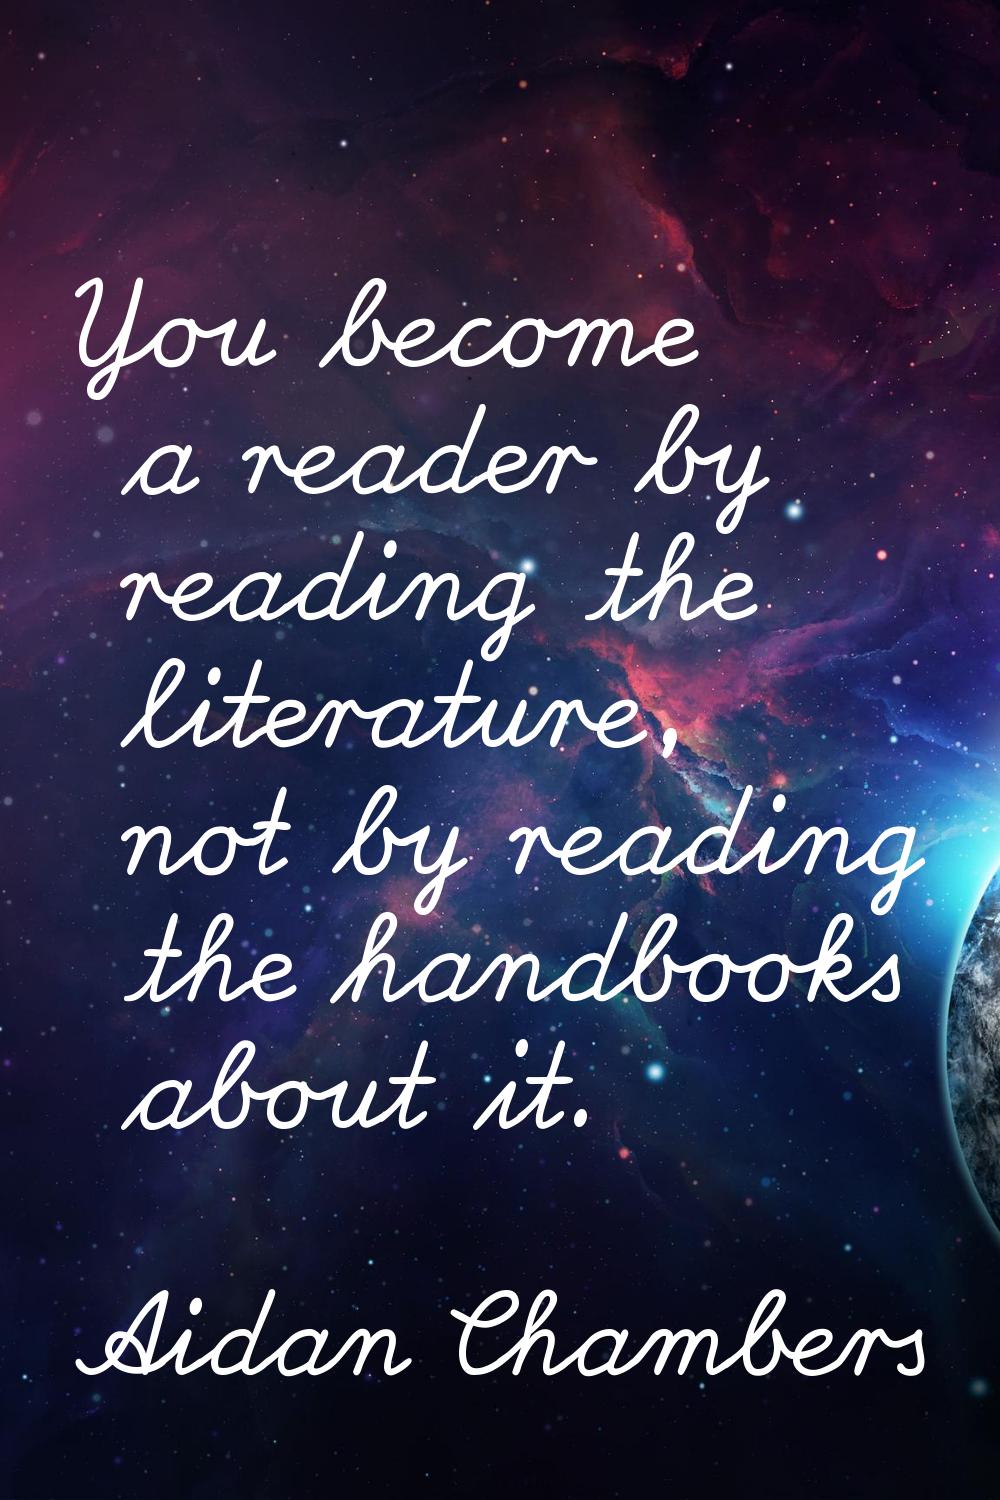 You become a reader by reading the literature, not by reading the handbooks about it.